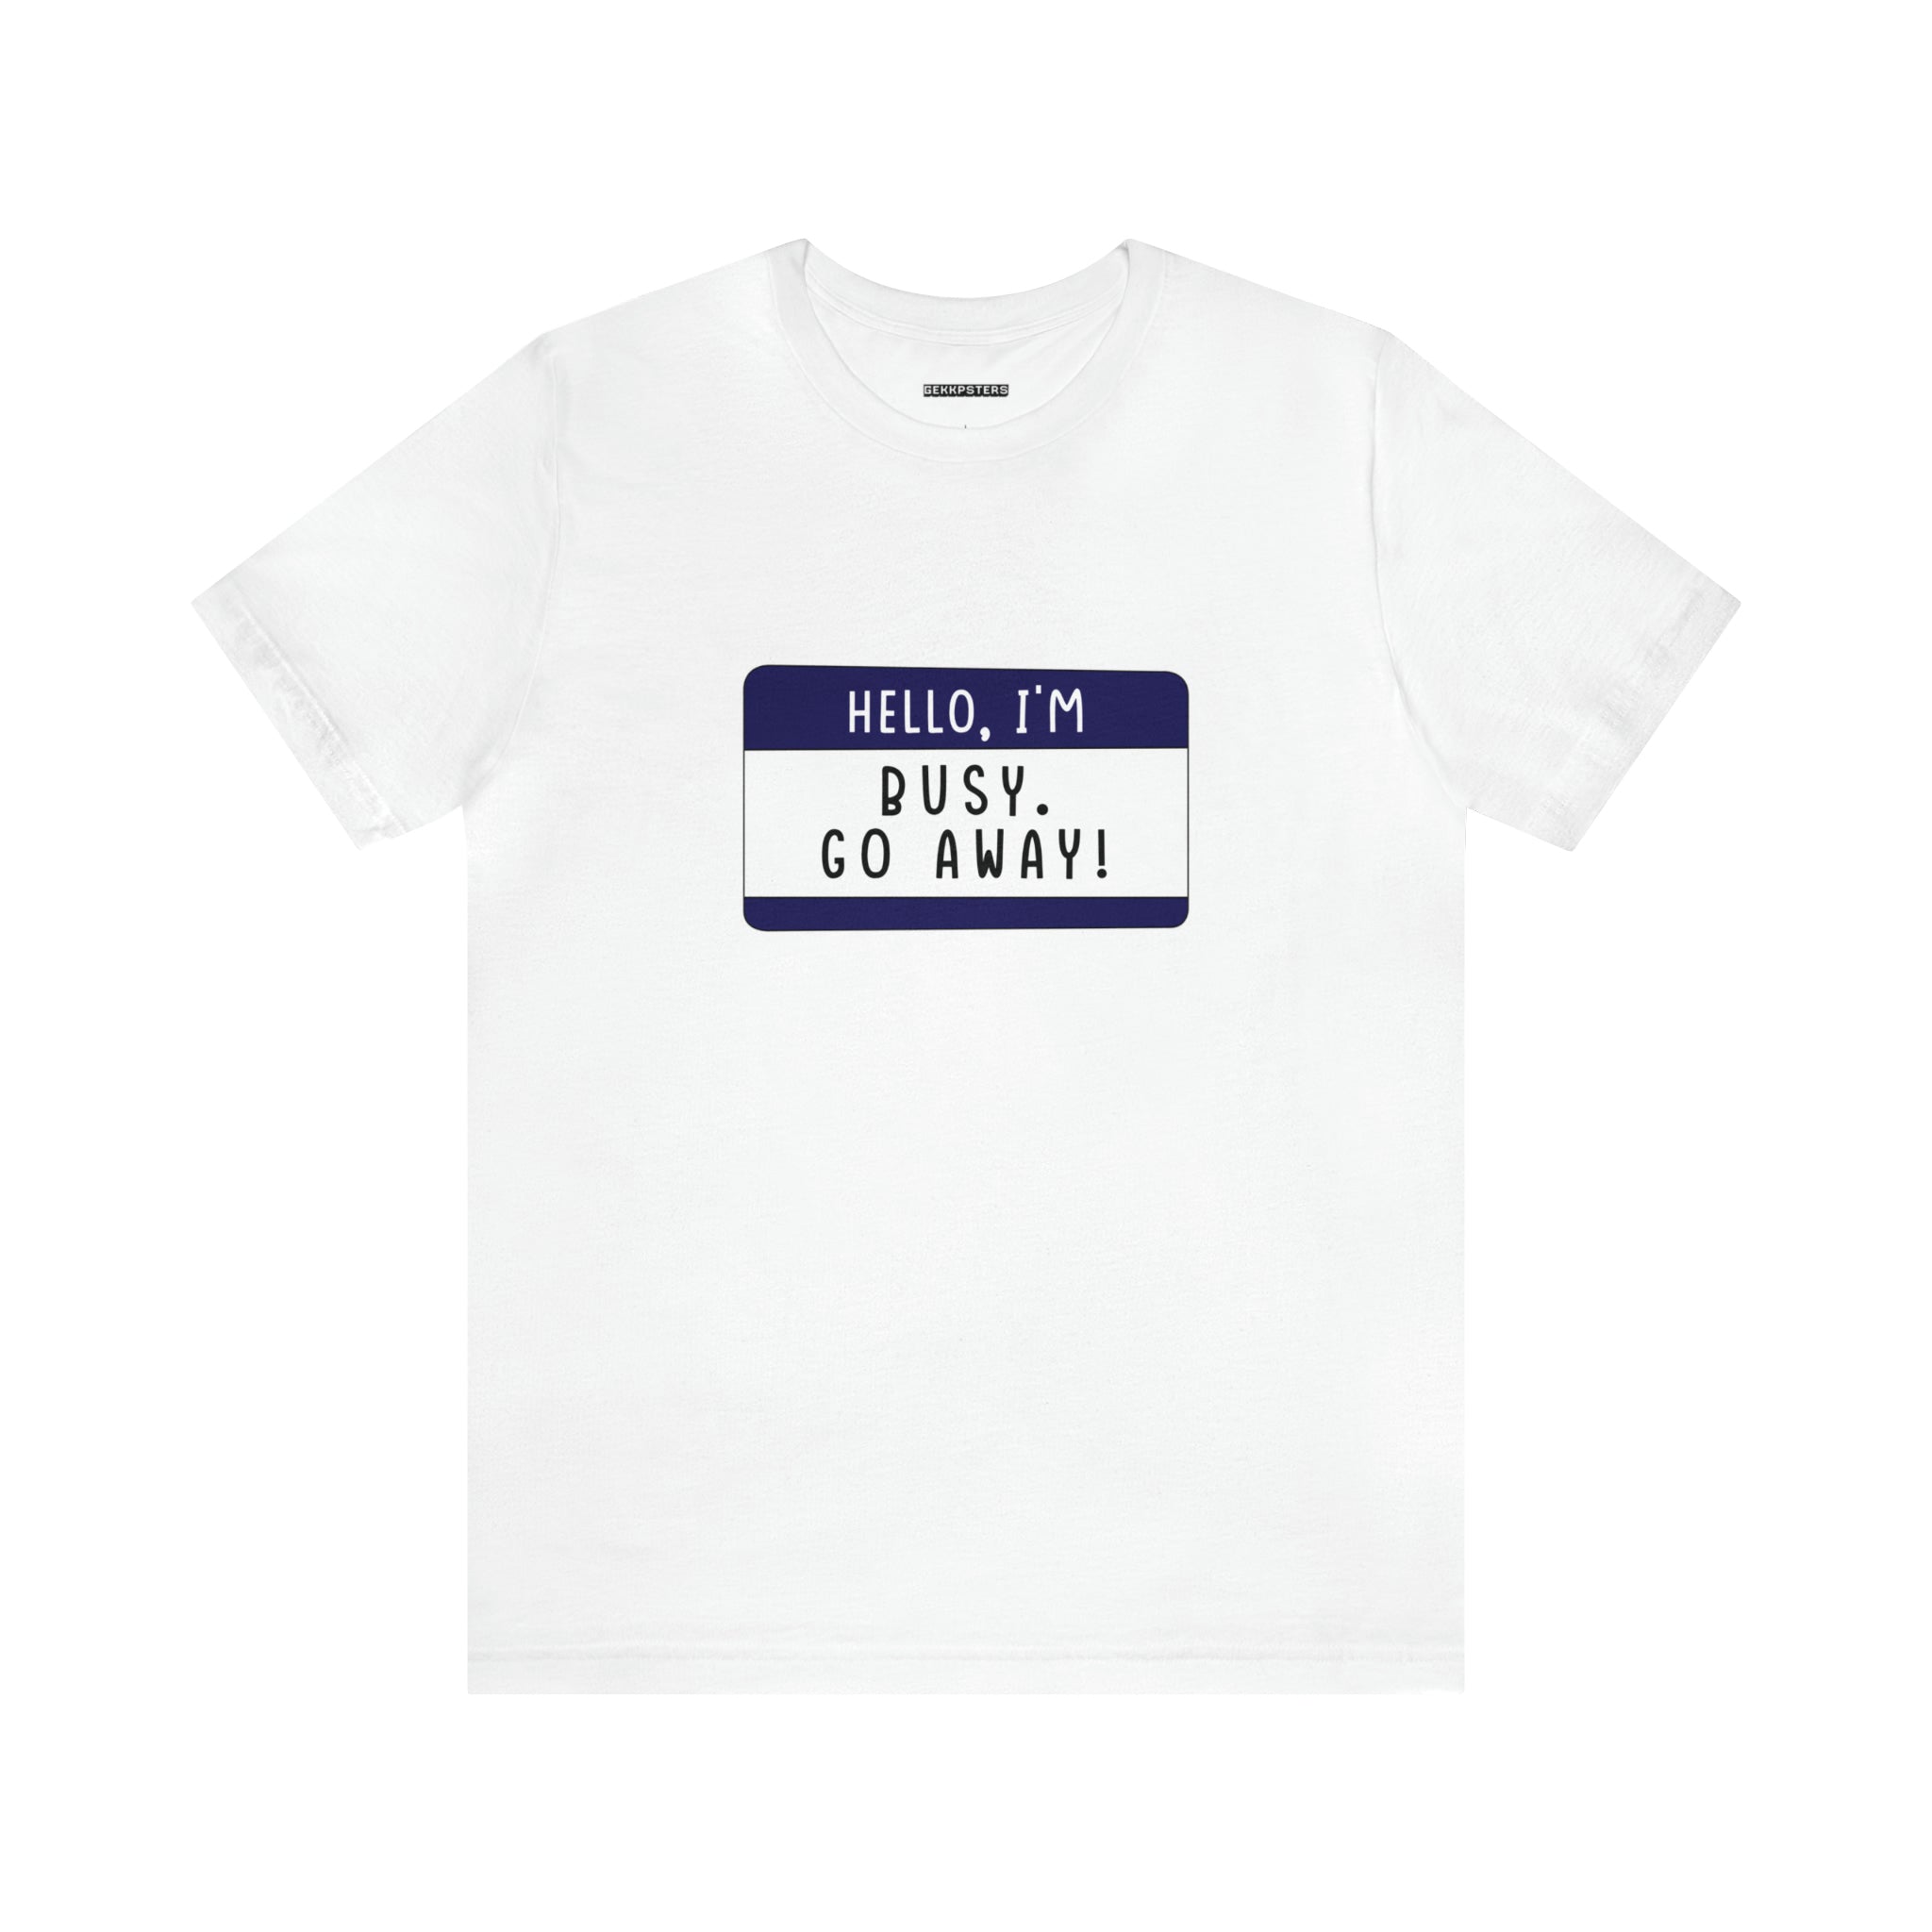 Hello, I'm Busy Go Away T-Shirt with a printed text box that reads "hello, i’m busy. go away!" on the chest area, perfect for those seeking alone time.